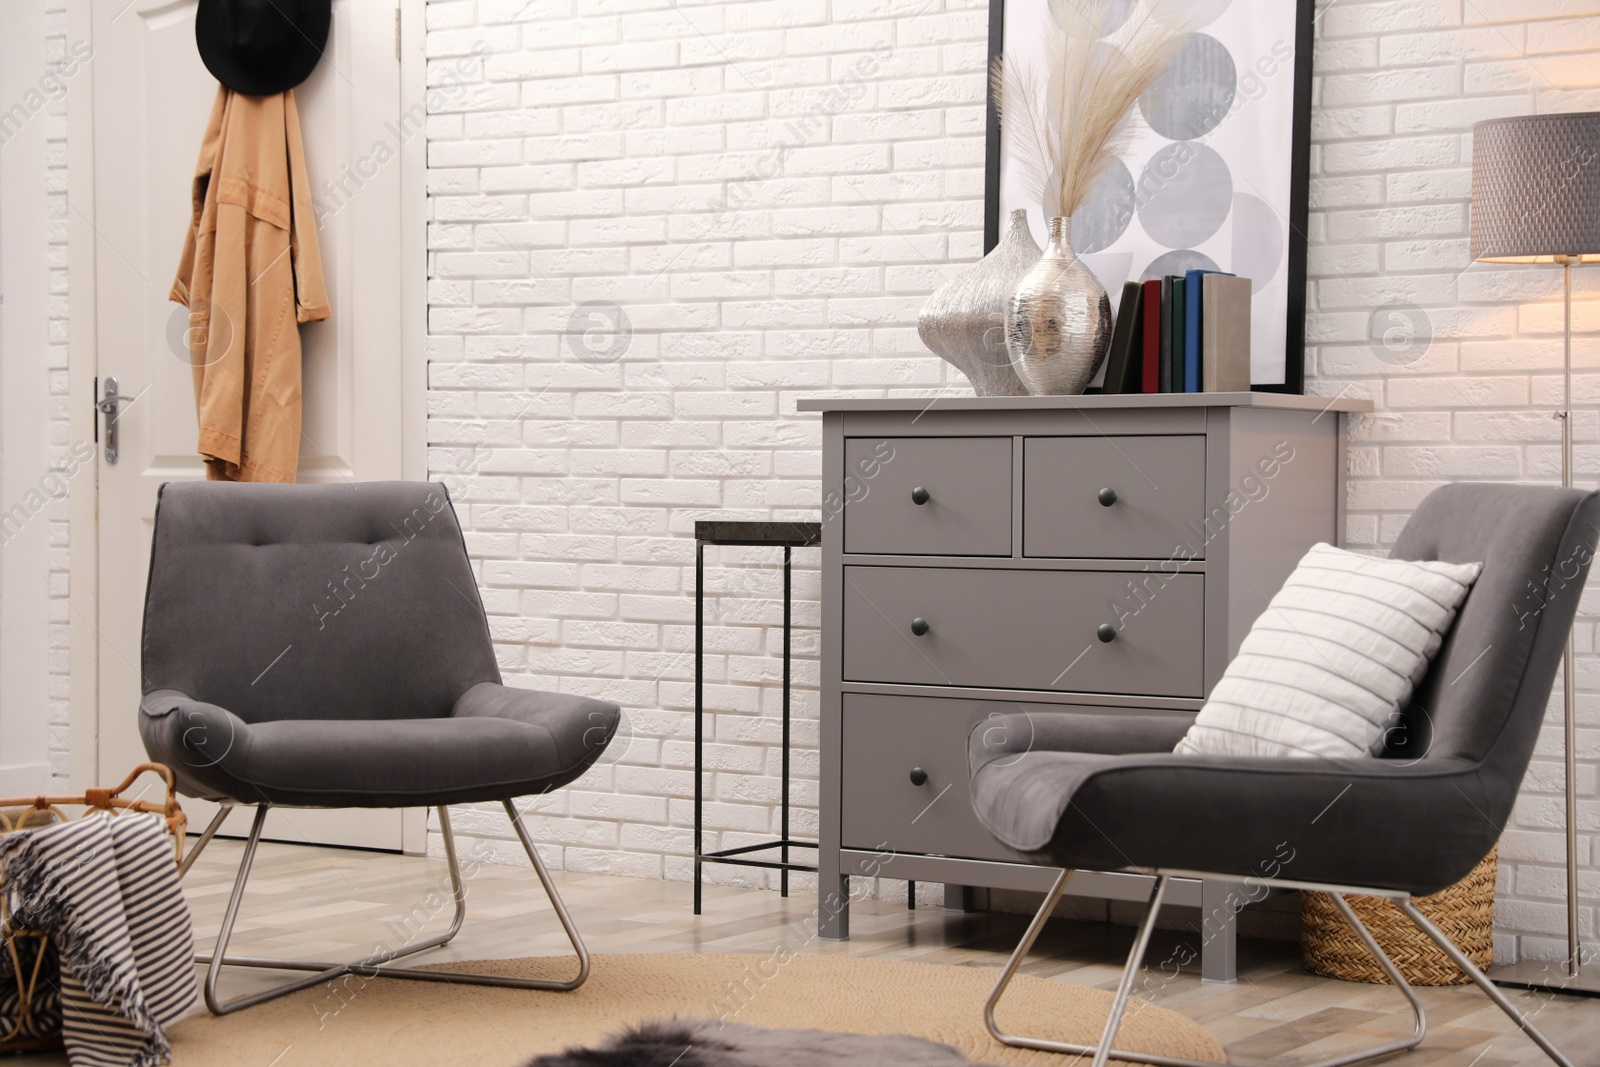 Photo of Stylish room interior with grey chest of drawers and chairs near white brick wall